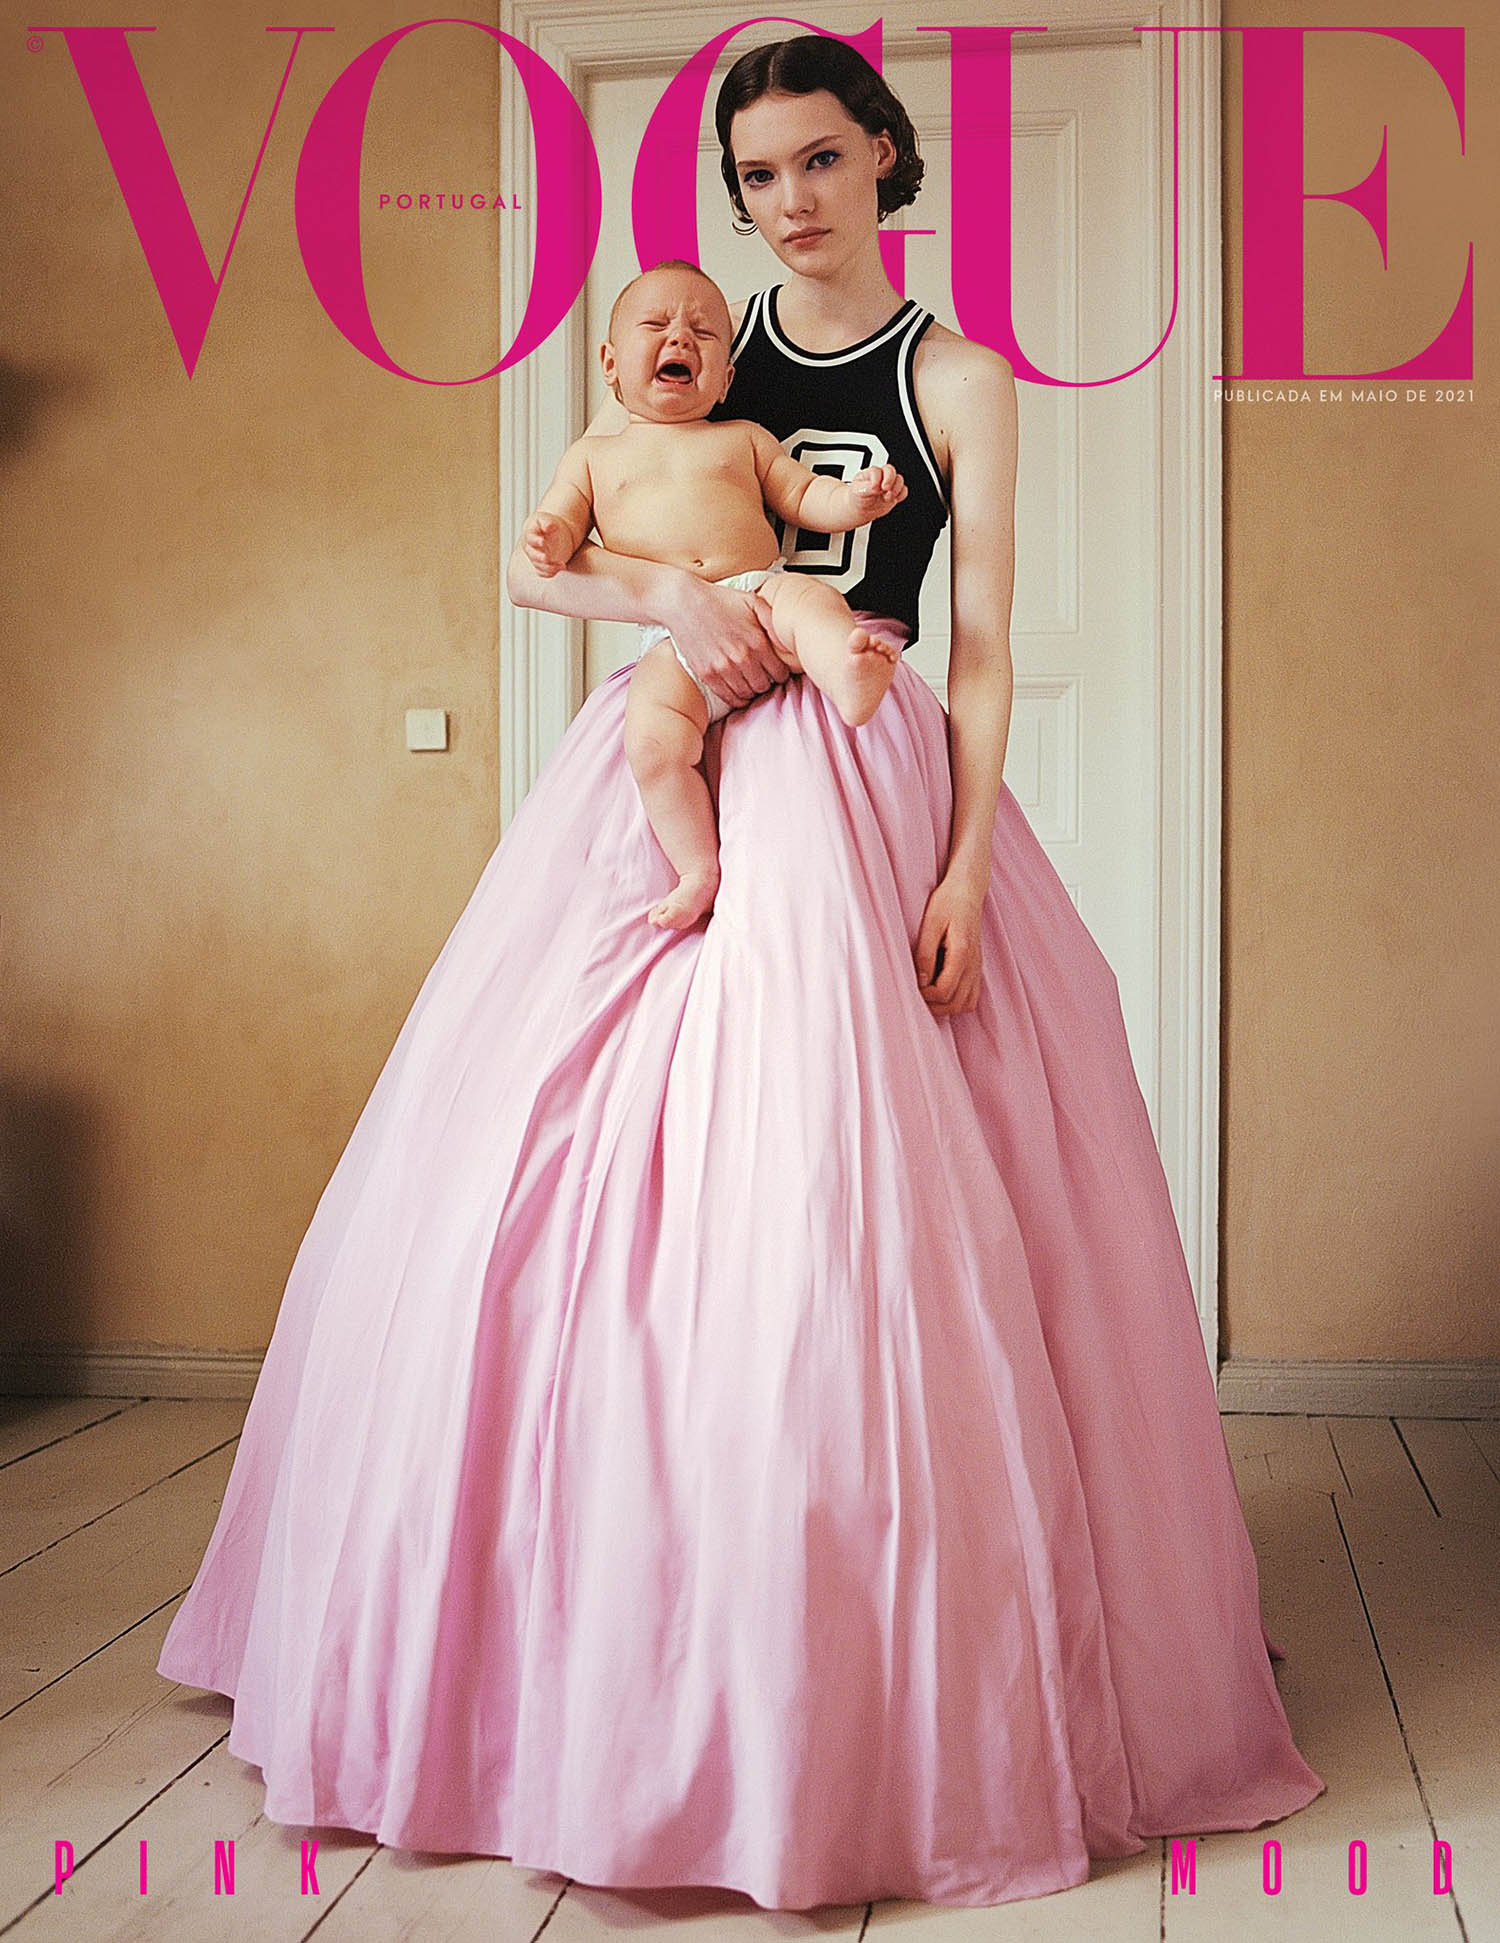 Penelope Ternes covers Vogue Portugal May 2021 by Lara Alegre